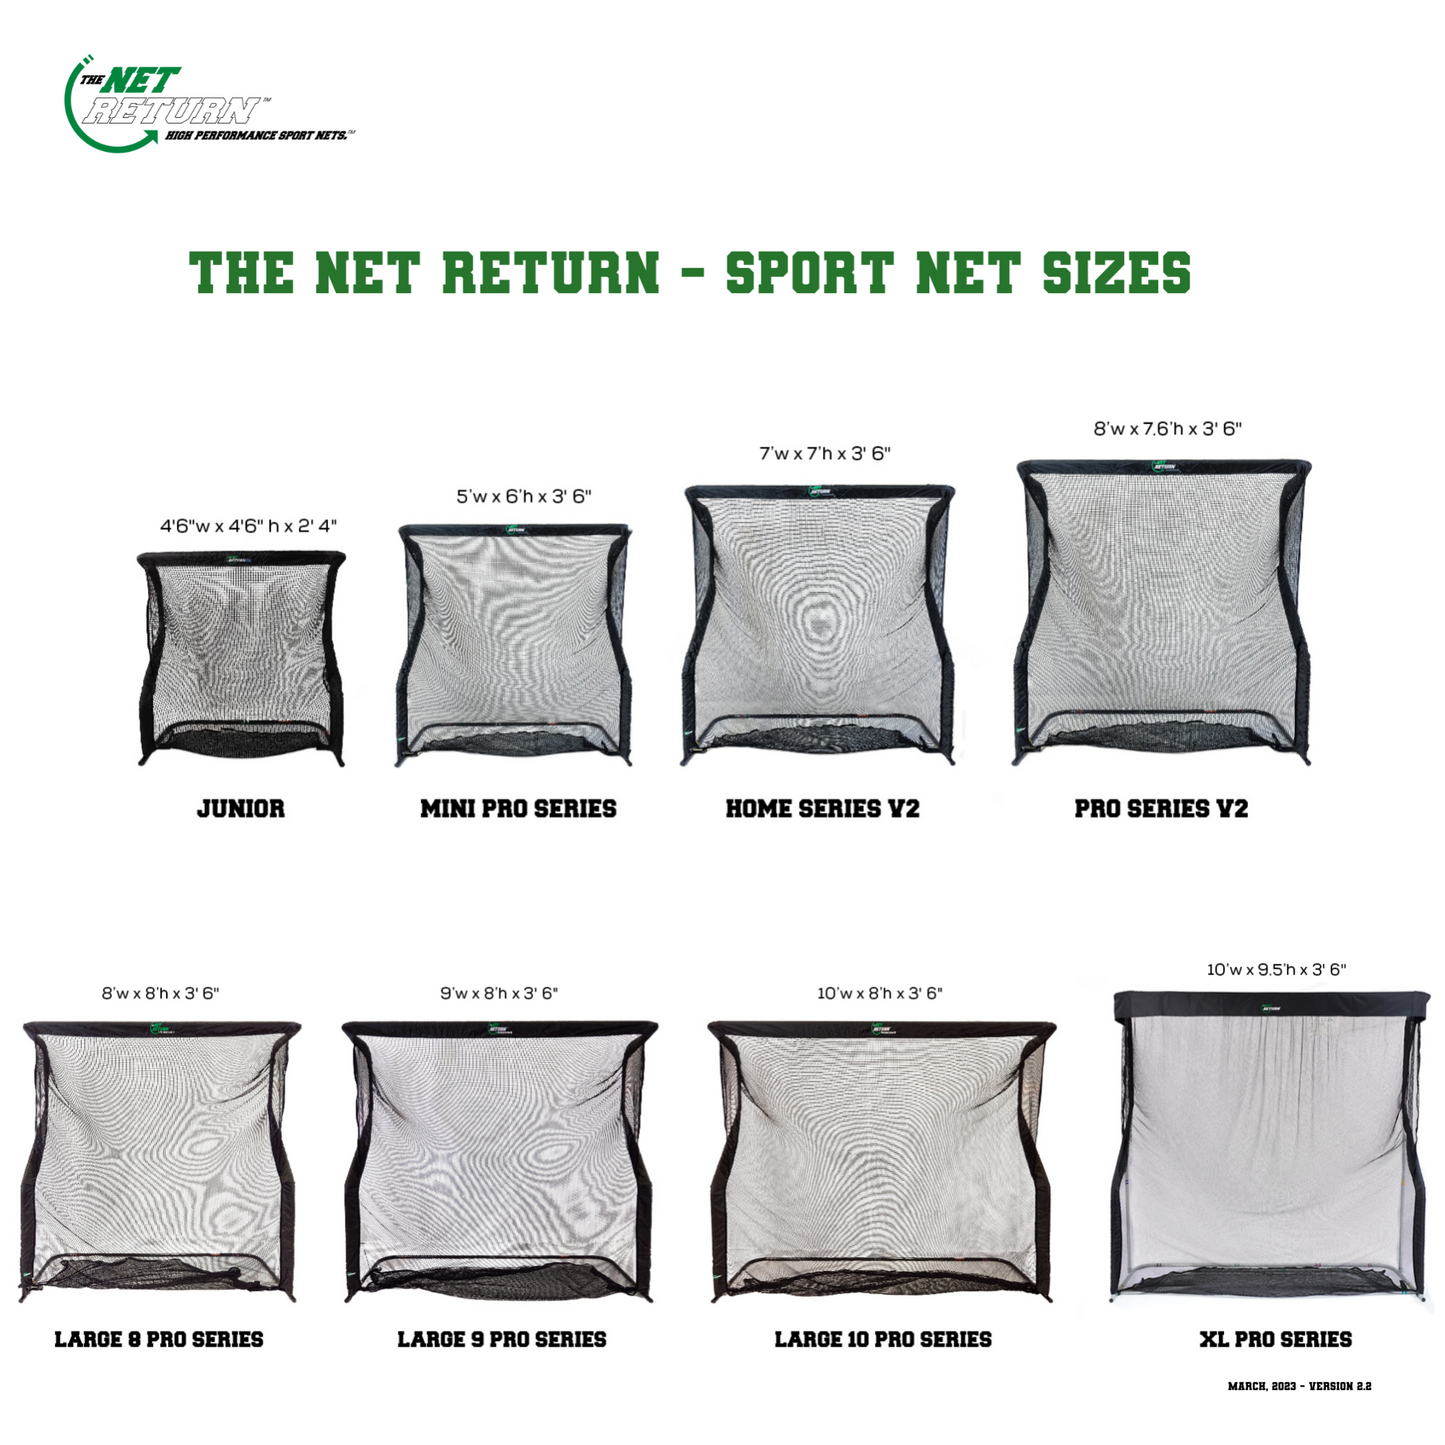 Net Return Graphic Showing Different Size Options